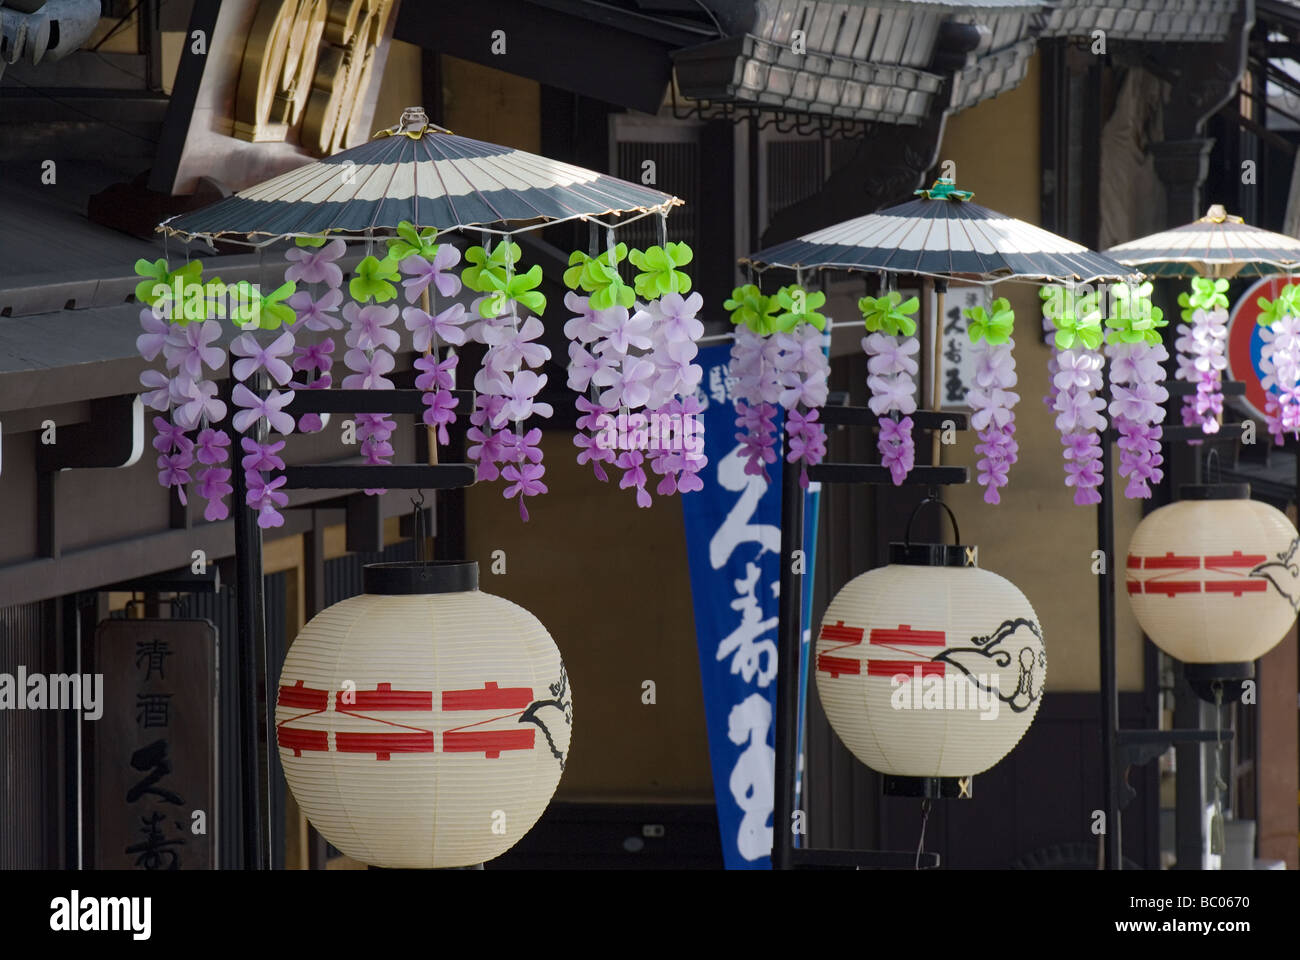 Traditional paper lanterns with flower decorated umbrellas line a street in Takayama Japan during the spring festival Stock Photo